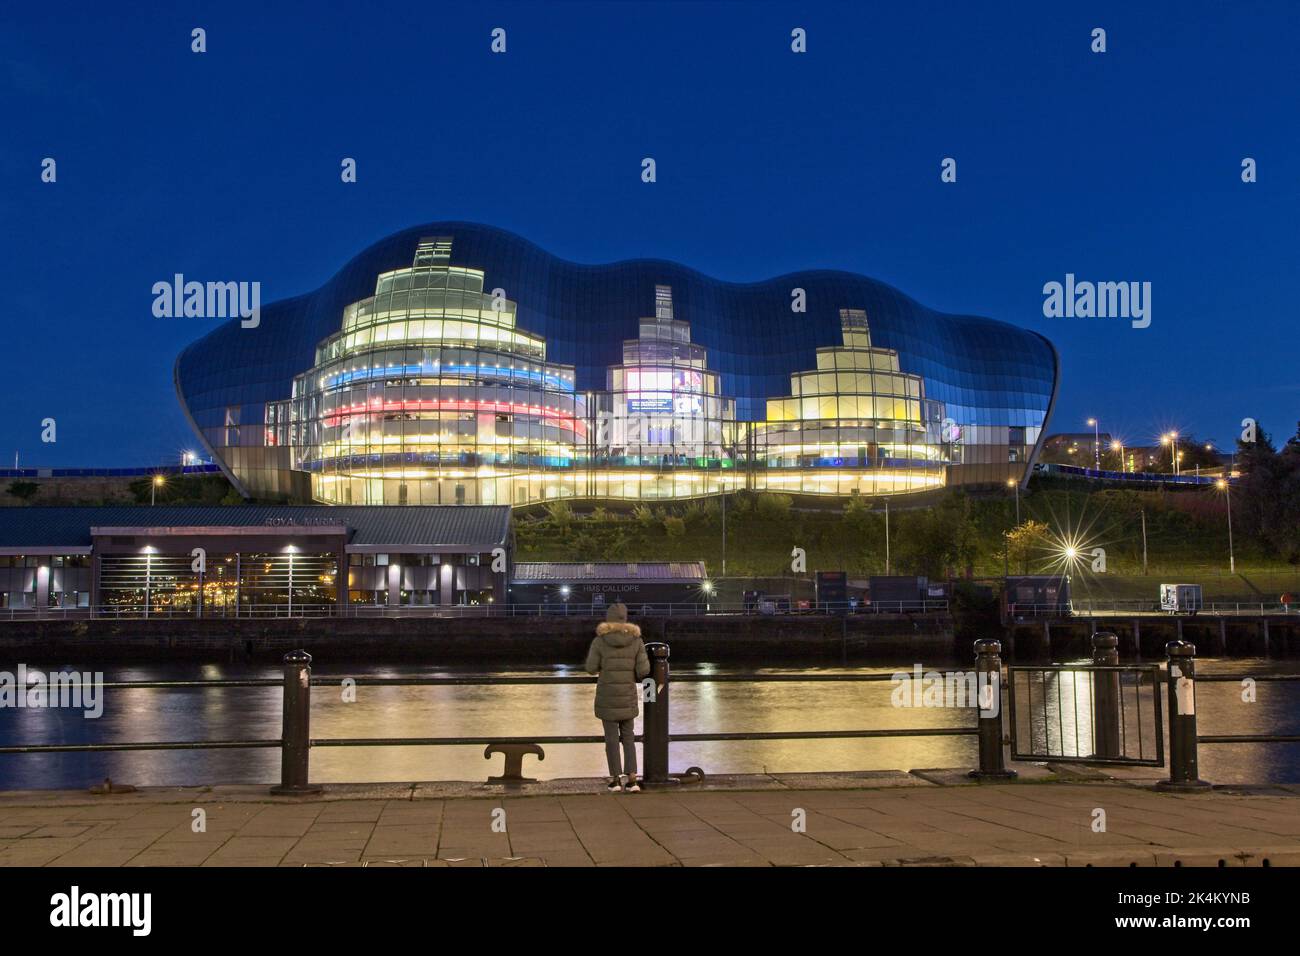 Opened in 2004, Sage Gateshead is a concert venue and musical education centre in Gateshead on the south side of the River Tyne in North East England. Stock Photo